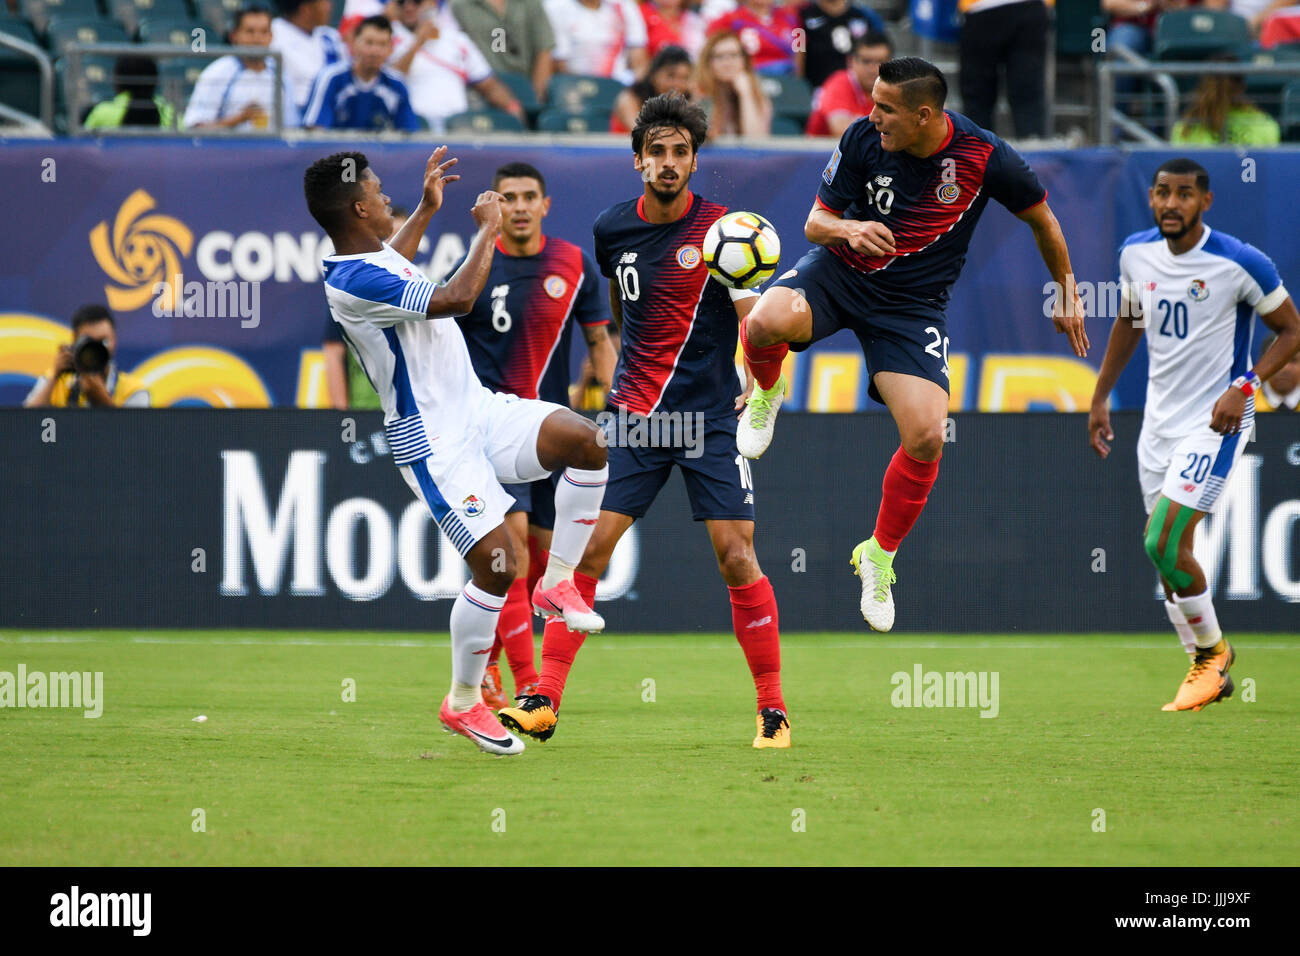 Philadelphia, Pennsylvania, USA. 19th July, 2017. DAVID GUZMAN Costa Rica goes for the ball against Panama during their quarter final match held at Lincoln Financial Field in Philadelphia PA Credit: Ricky Fitchett/ZUMA Wire/Alamy Live News Stock Photo